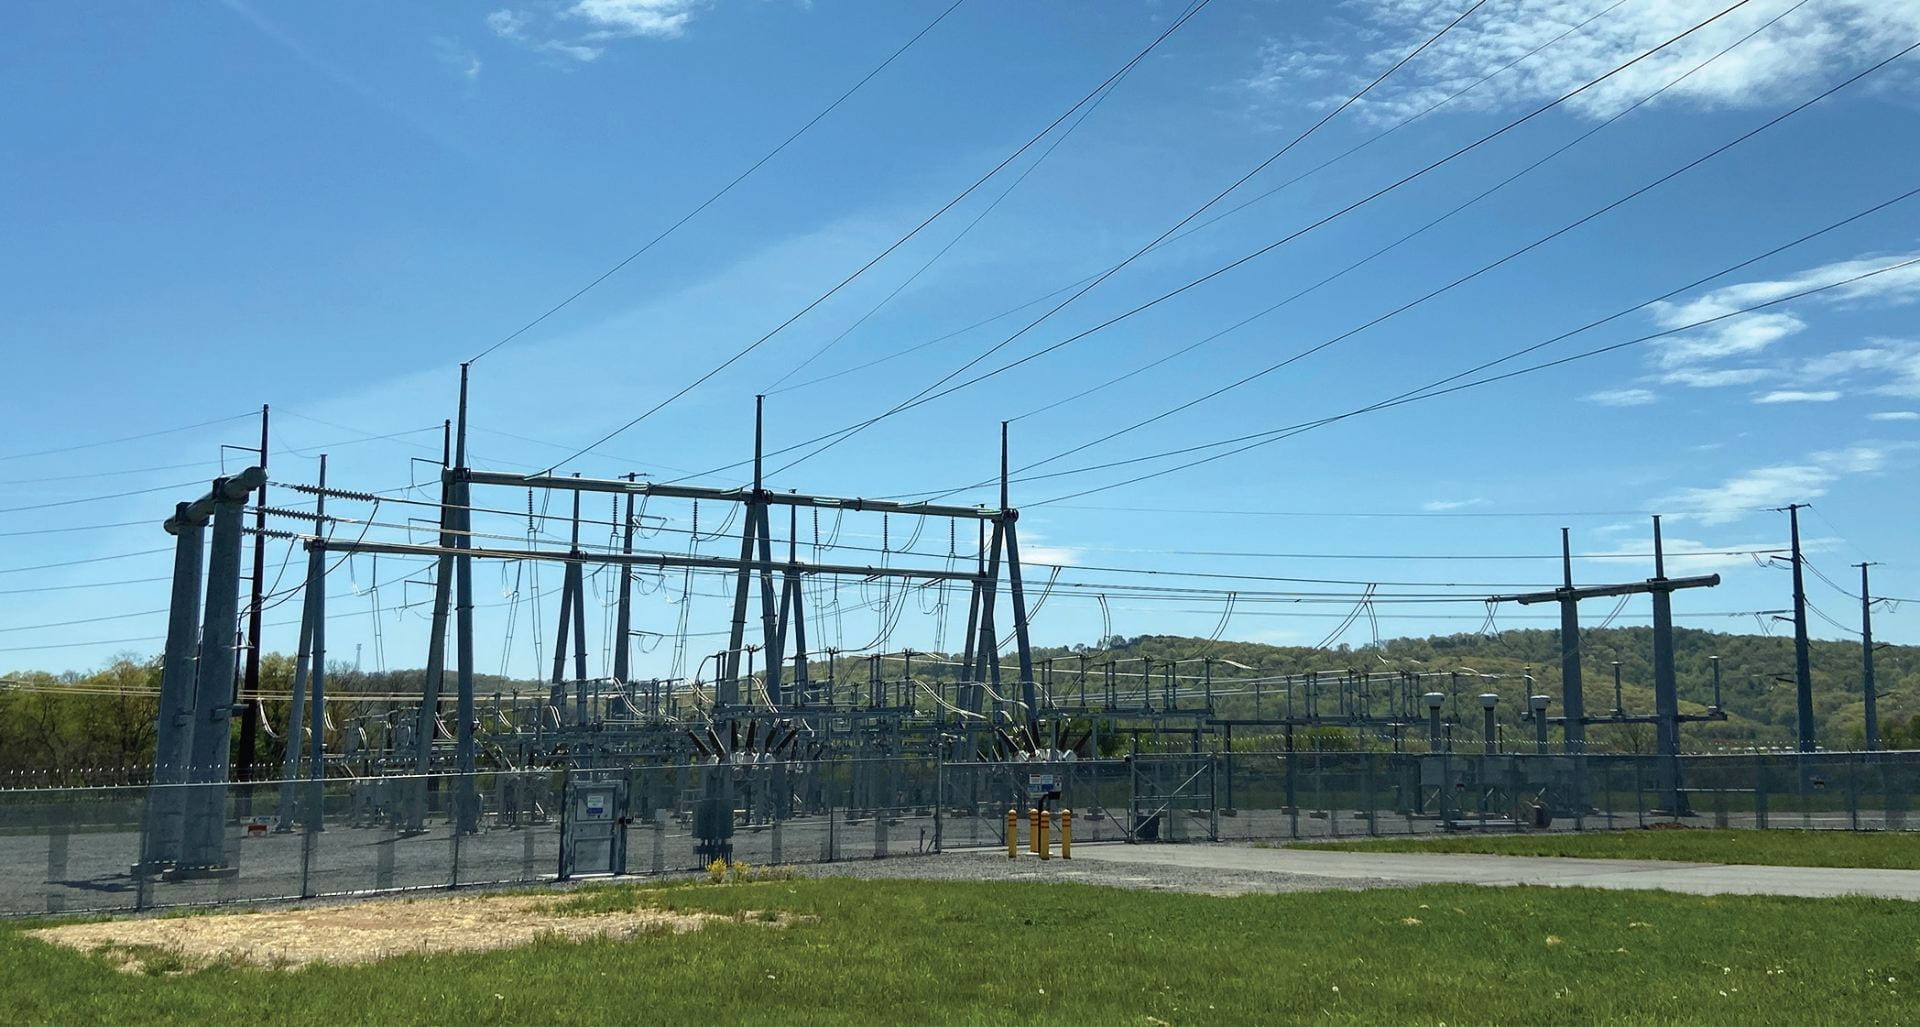 An electrical substation. Credit: Penn State MCOR